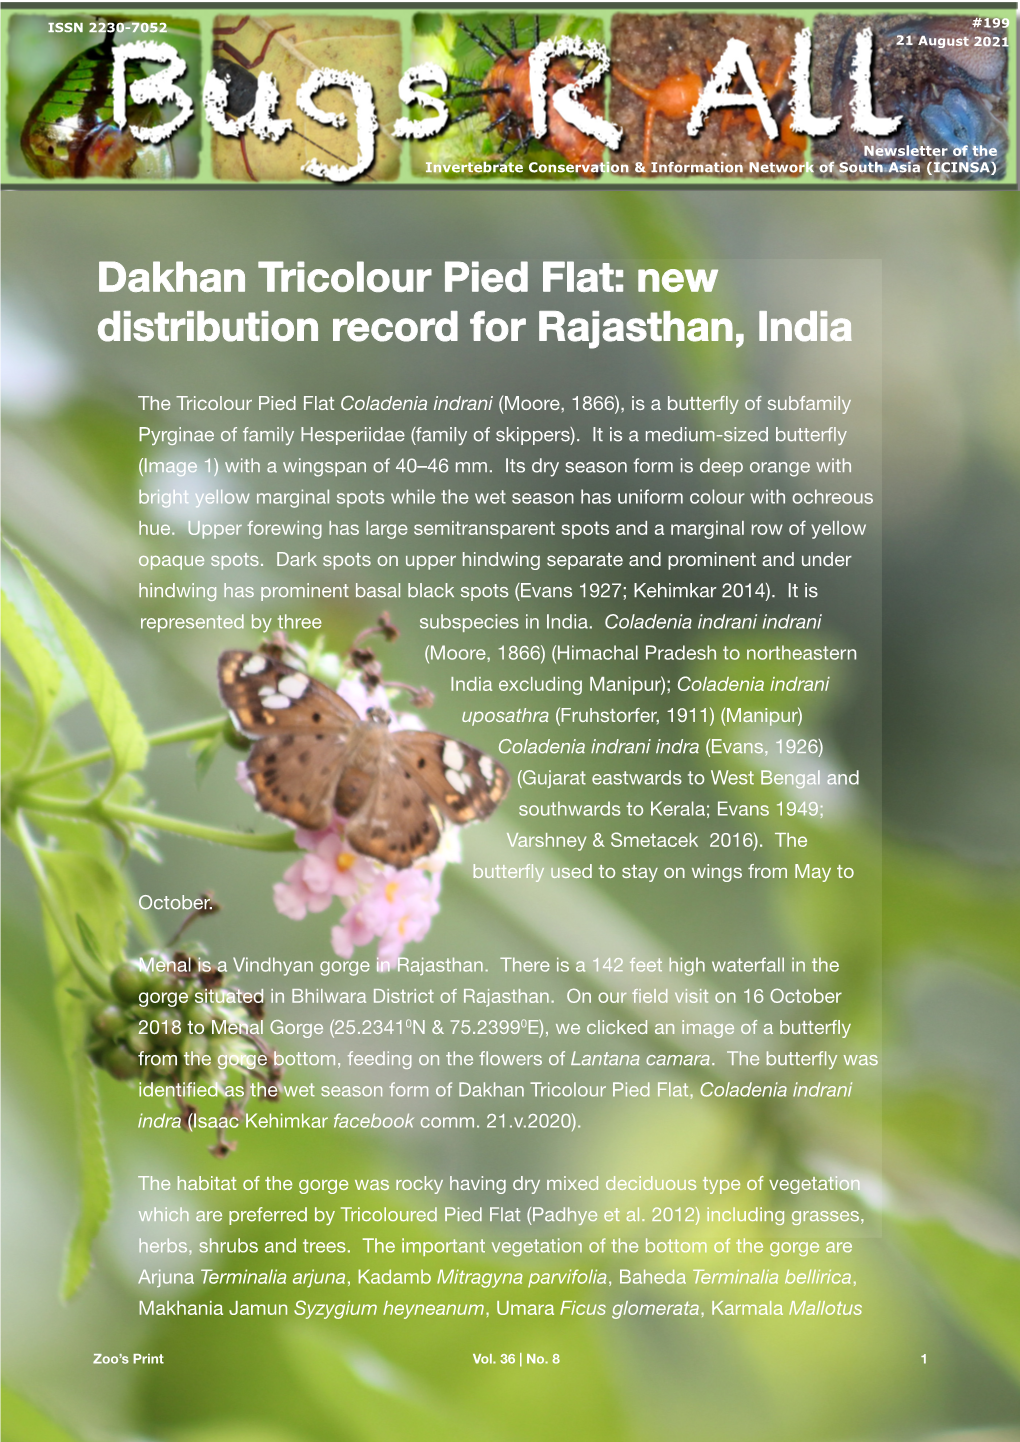 Dakhan Tricolour Pied Flat: New Distribution Record for Rajasthan, India